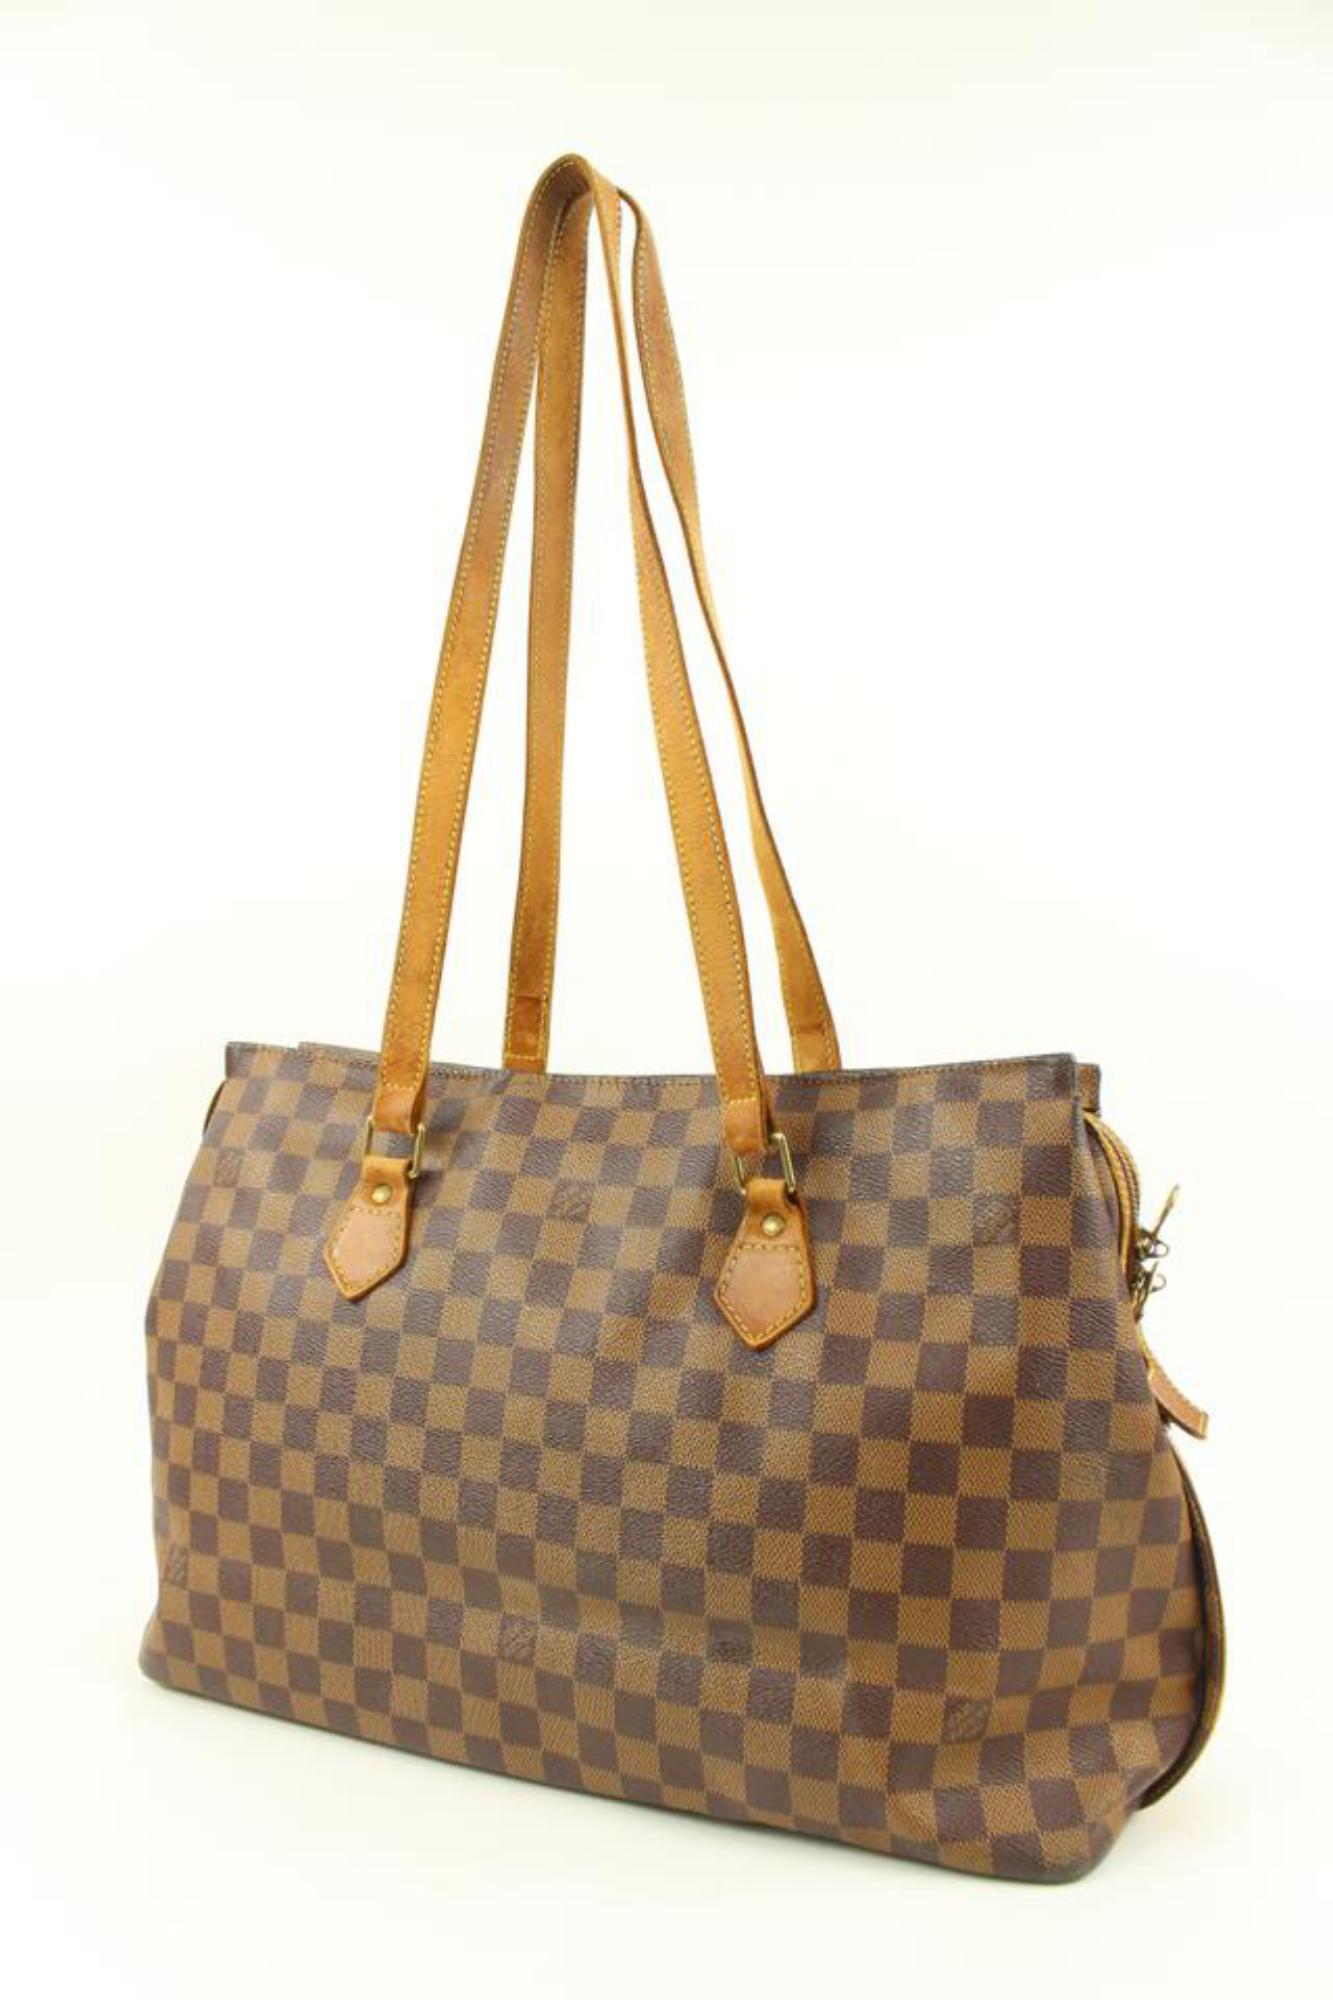 Louis Vuitton 100th Anniversary Centenaire Damier Ebene Columbine Zip Tote 57lv218s
Date Code/Serial Number: AS0927
Made In: France
Measurements: Length:  19